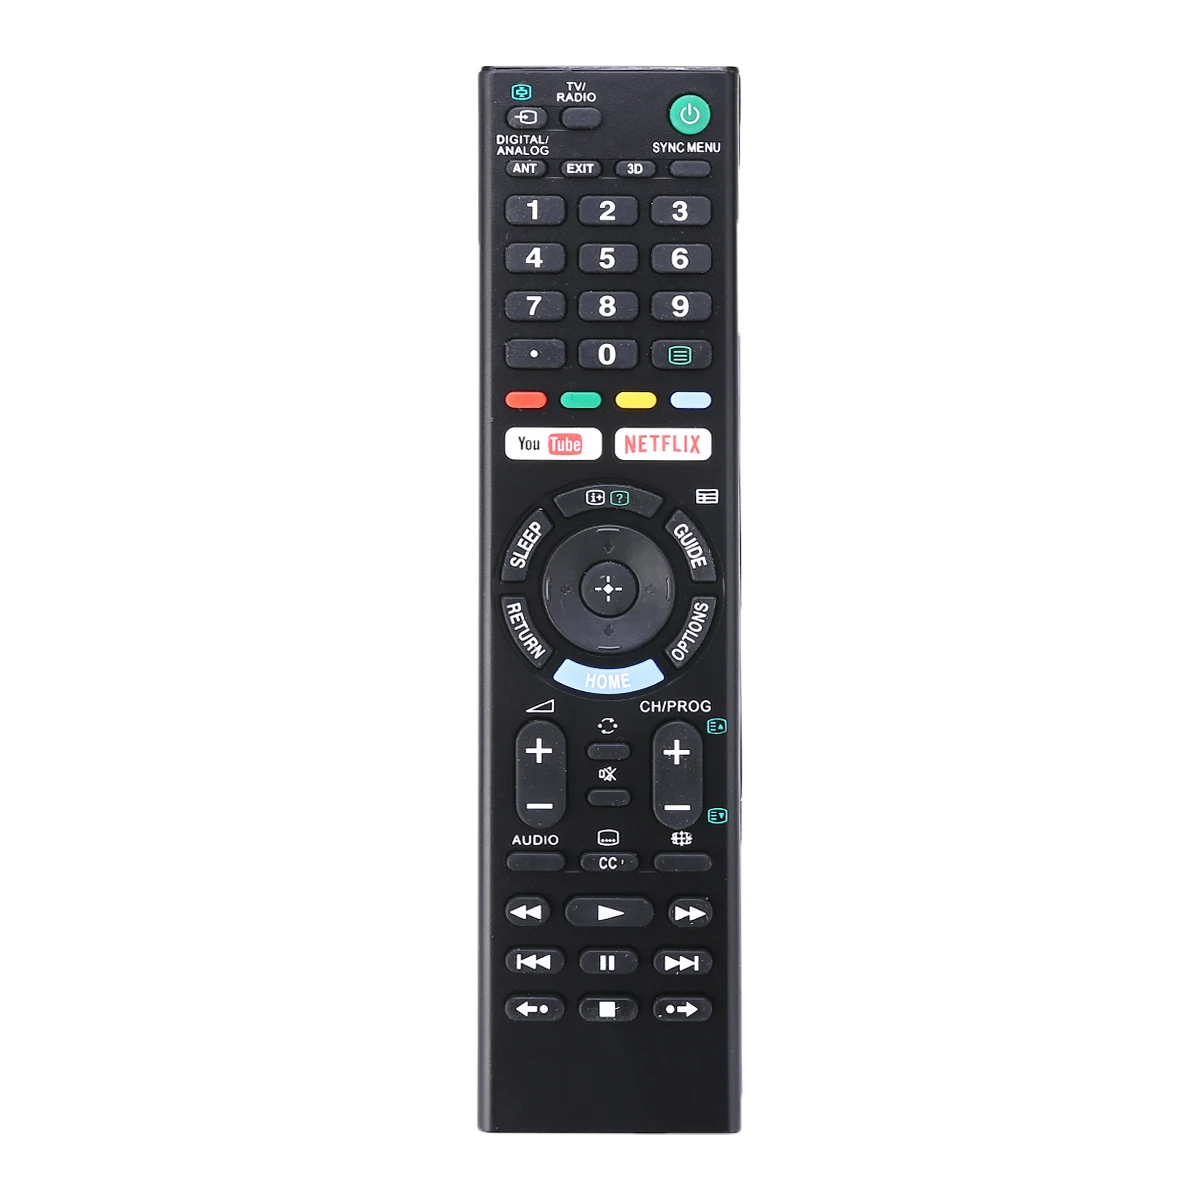 

Replacement RMT-TX300P Remote Control For Son RMT-TX300E RMT-TX300U KD-55X7000E Smart LCD TV Remote Controller, Black